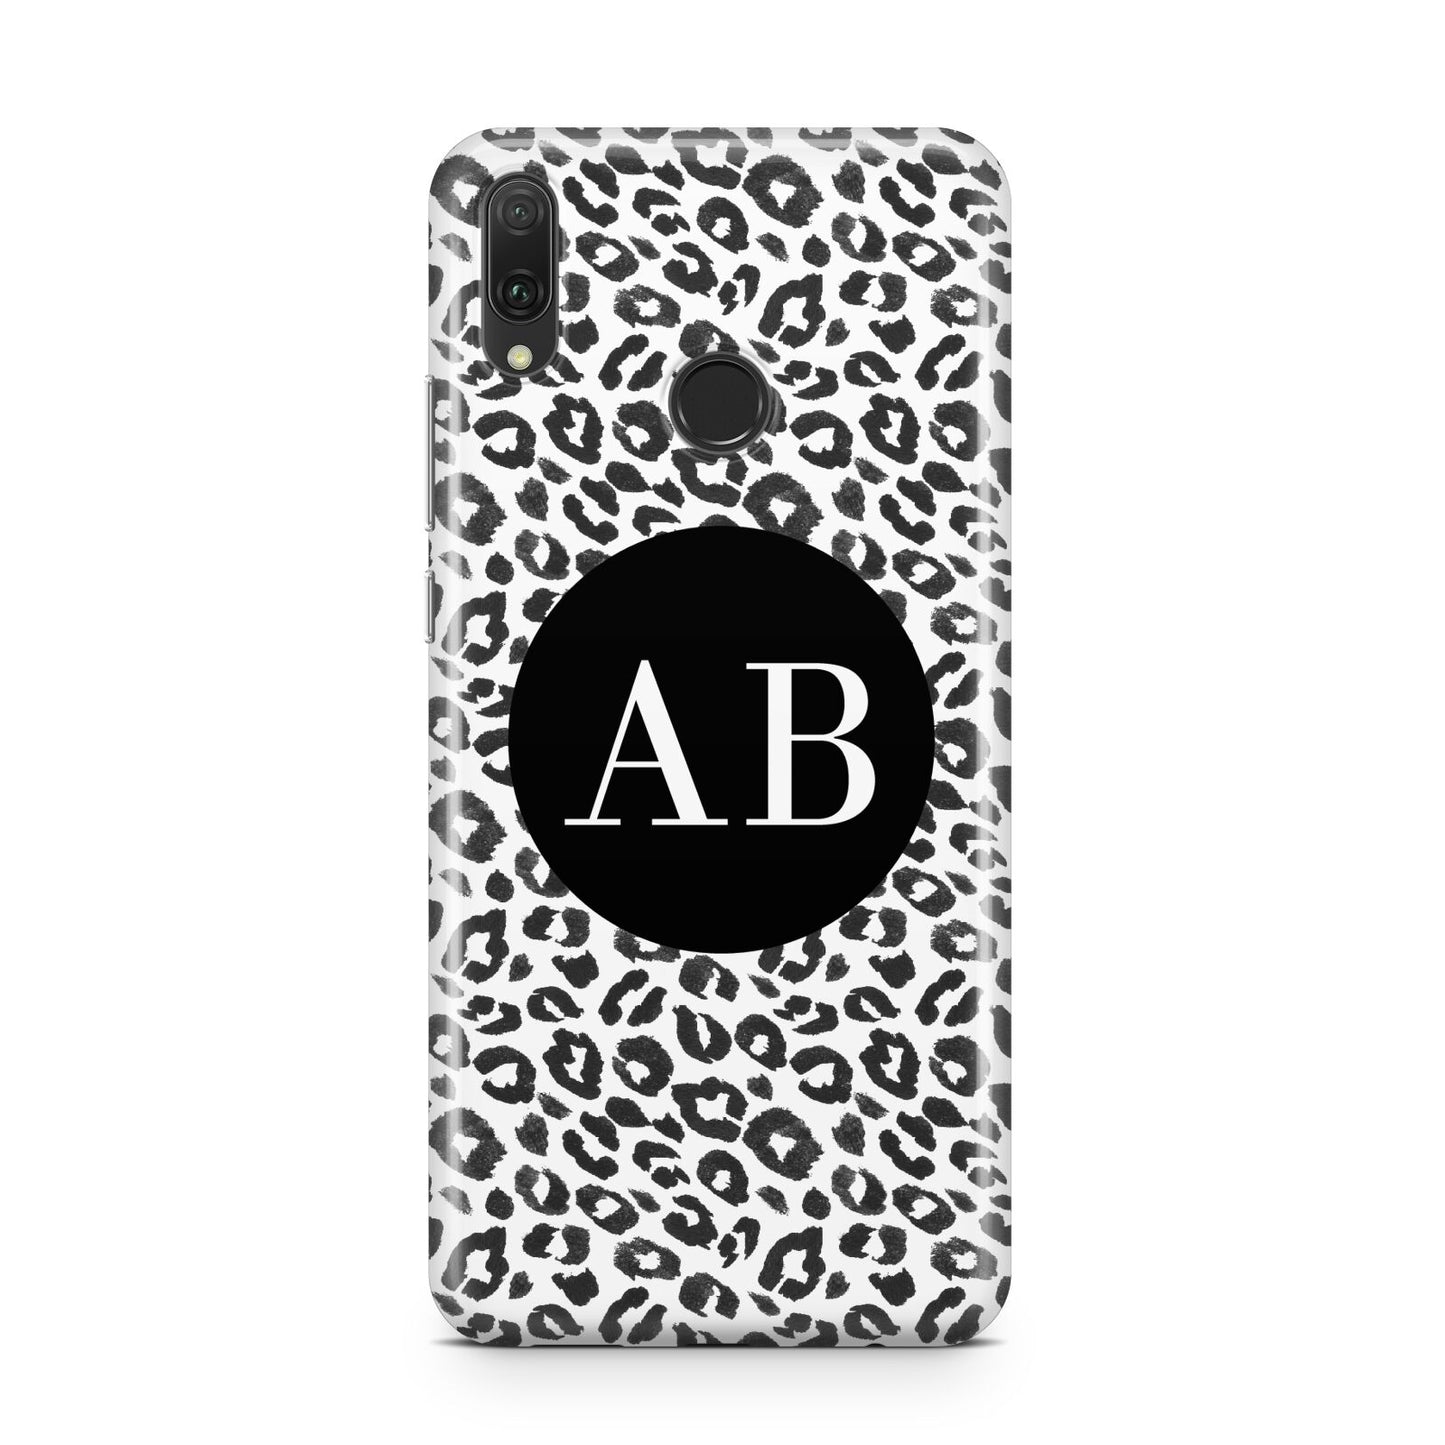 Leopard Print Black and White Huawei Y9 2019